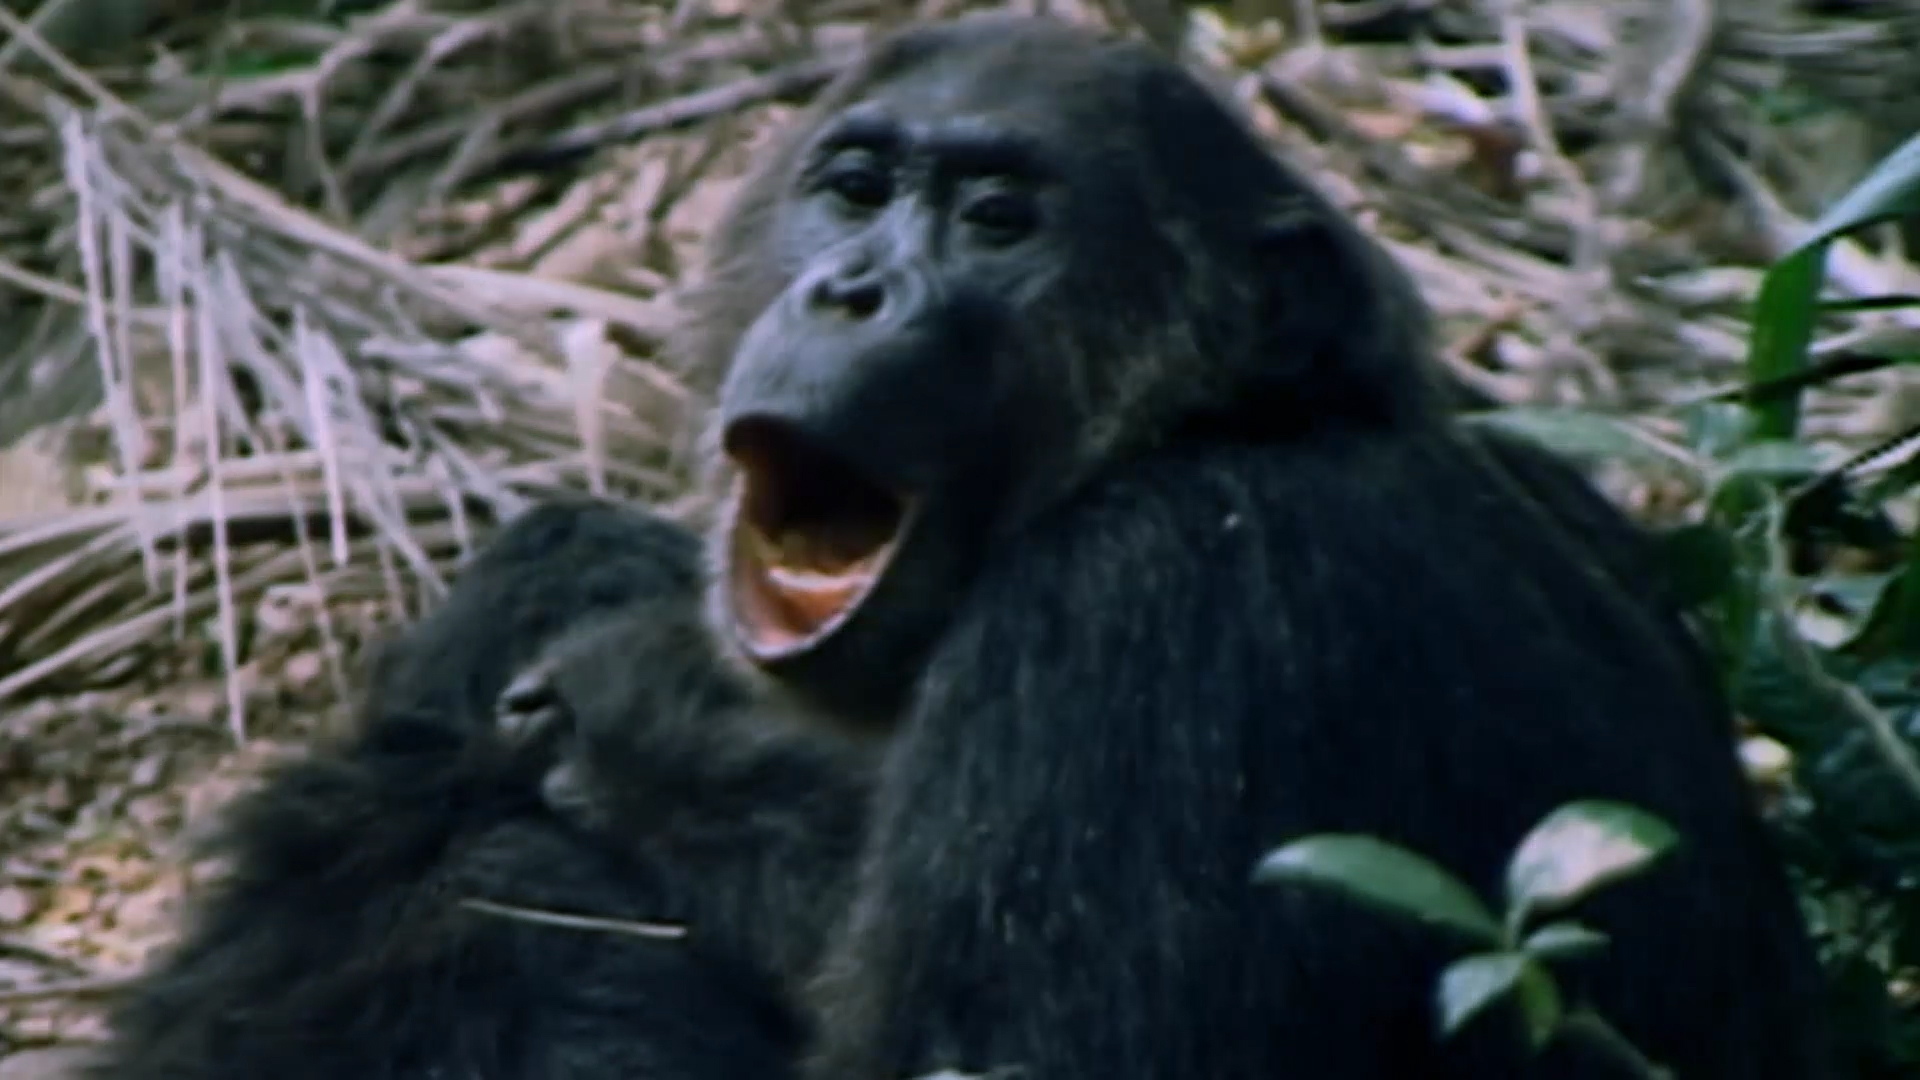 Video Gallery for Kingdom of the Apes - Nat Geo WILD